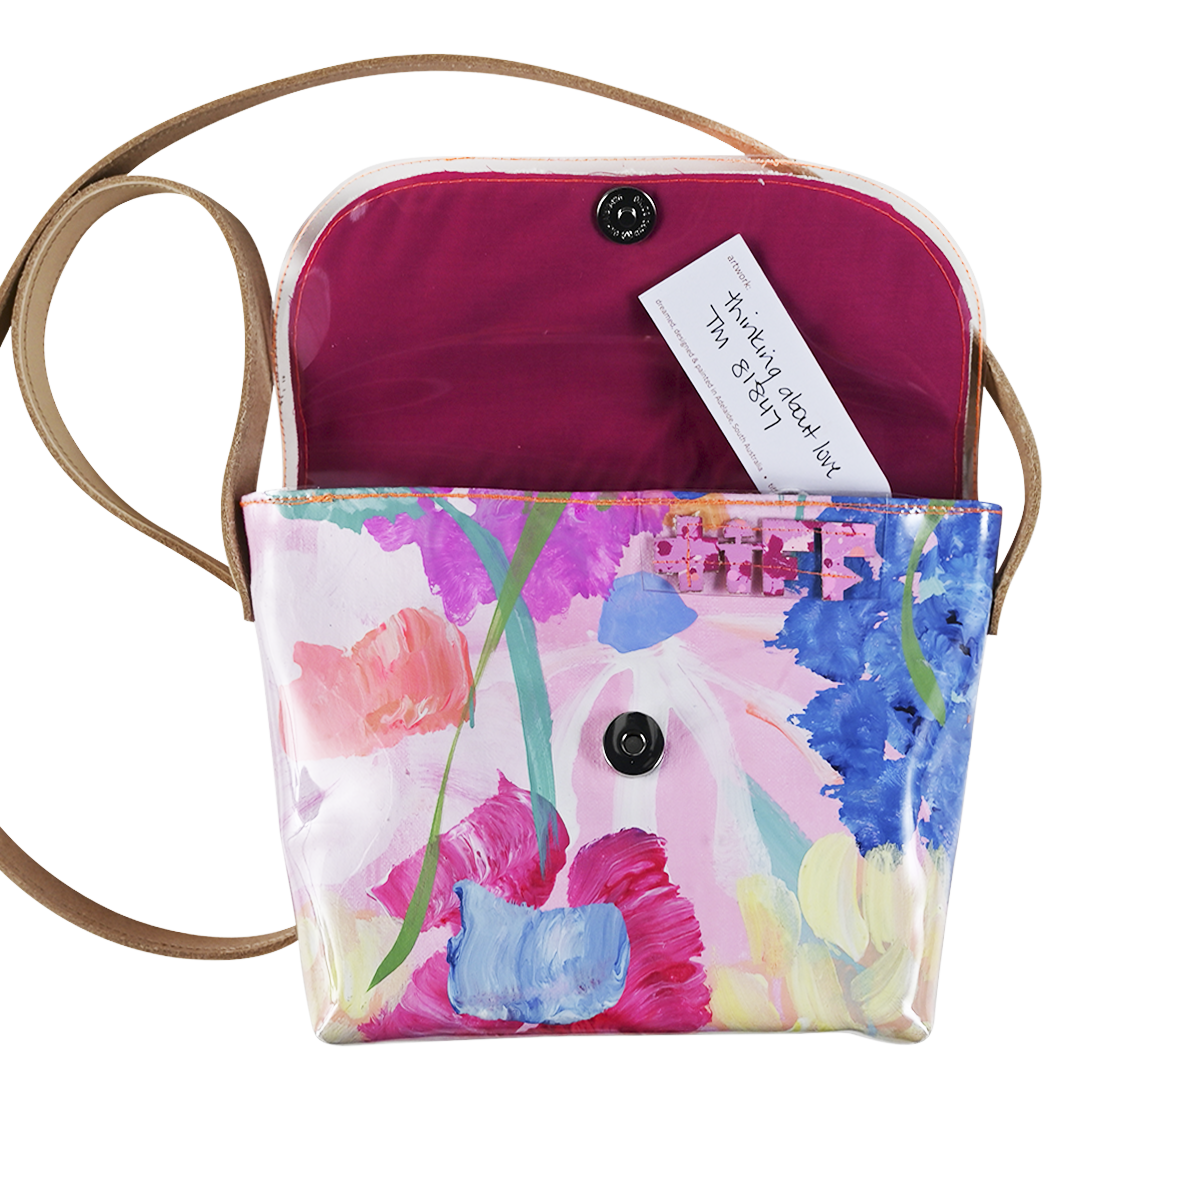 thinking about love | crossbody day bag - Tiff Manuell